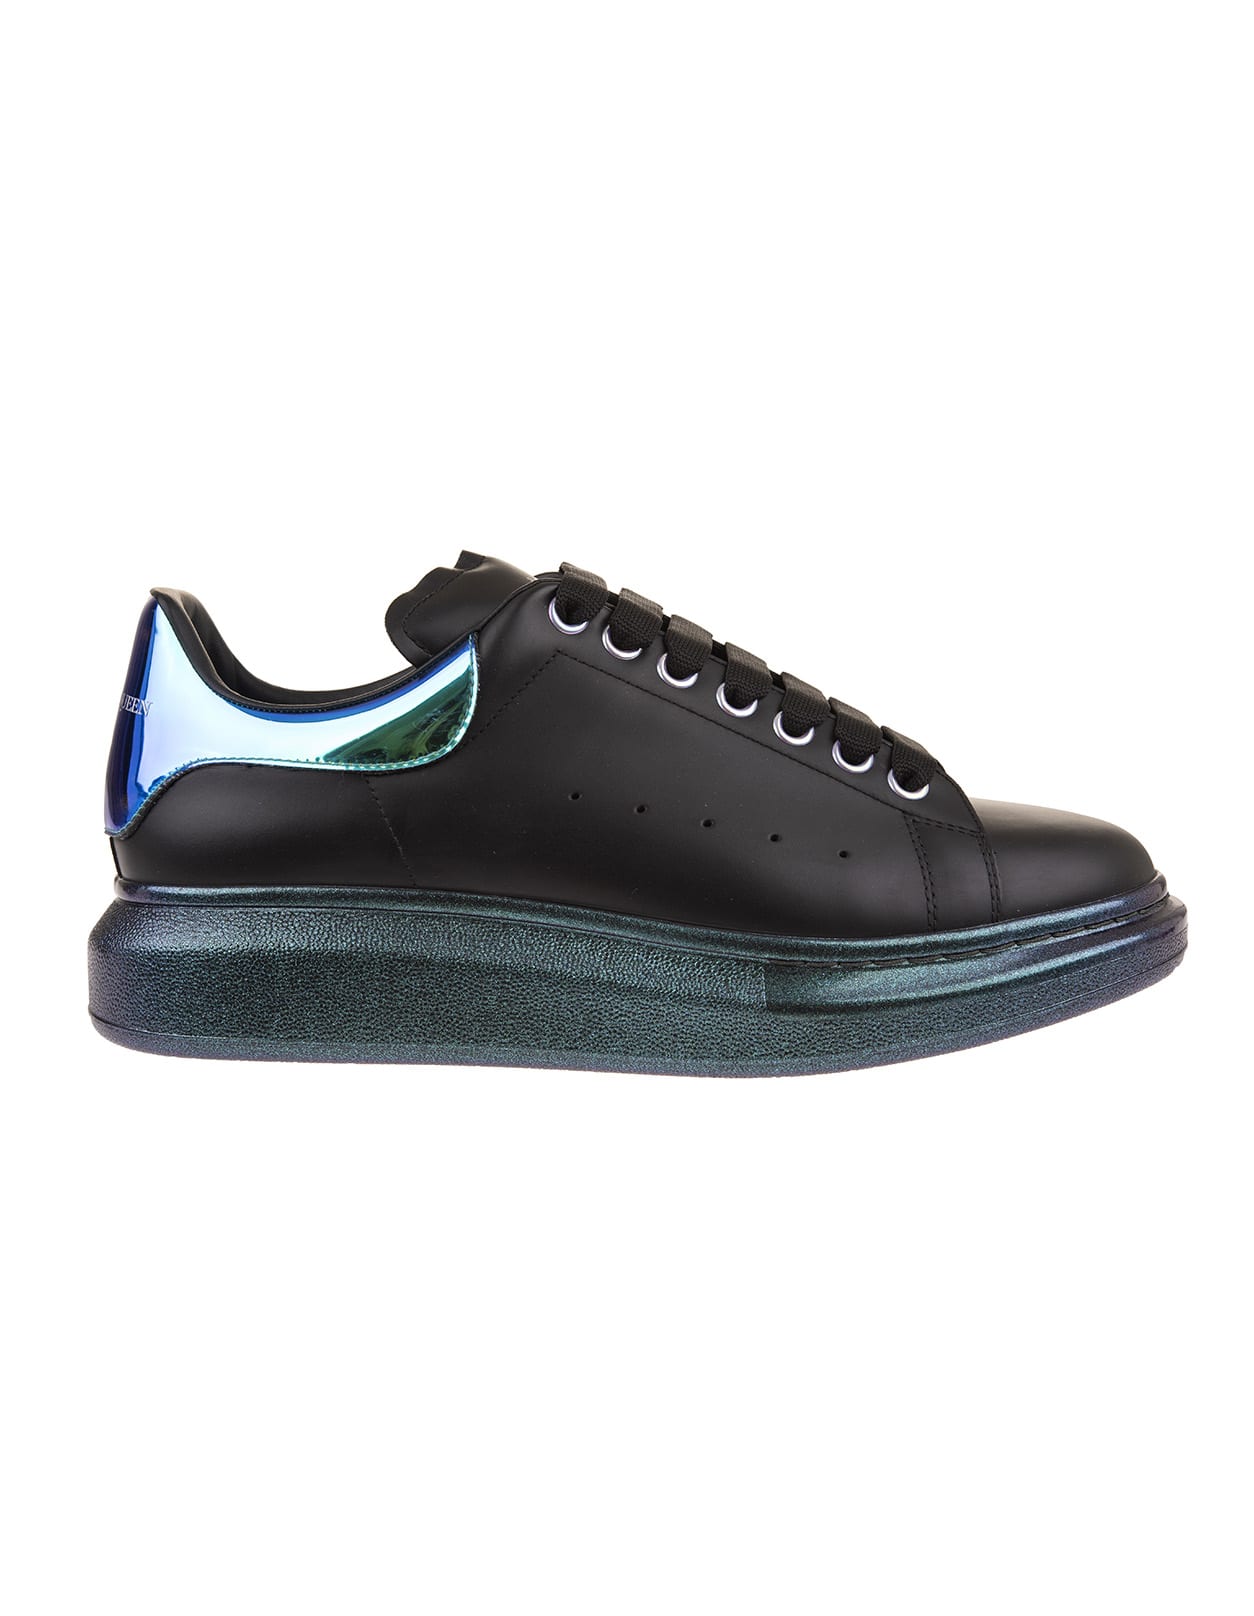 ALEXANDER MCQUEEN MAN BLACK OVERSIZE SNEAKERS WITH IRIDESCENT SPOILER AND BLUE SOLE,625168-WHYBA 1252